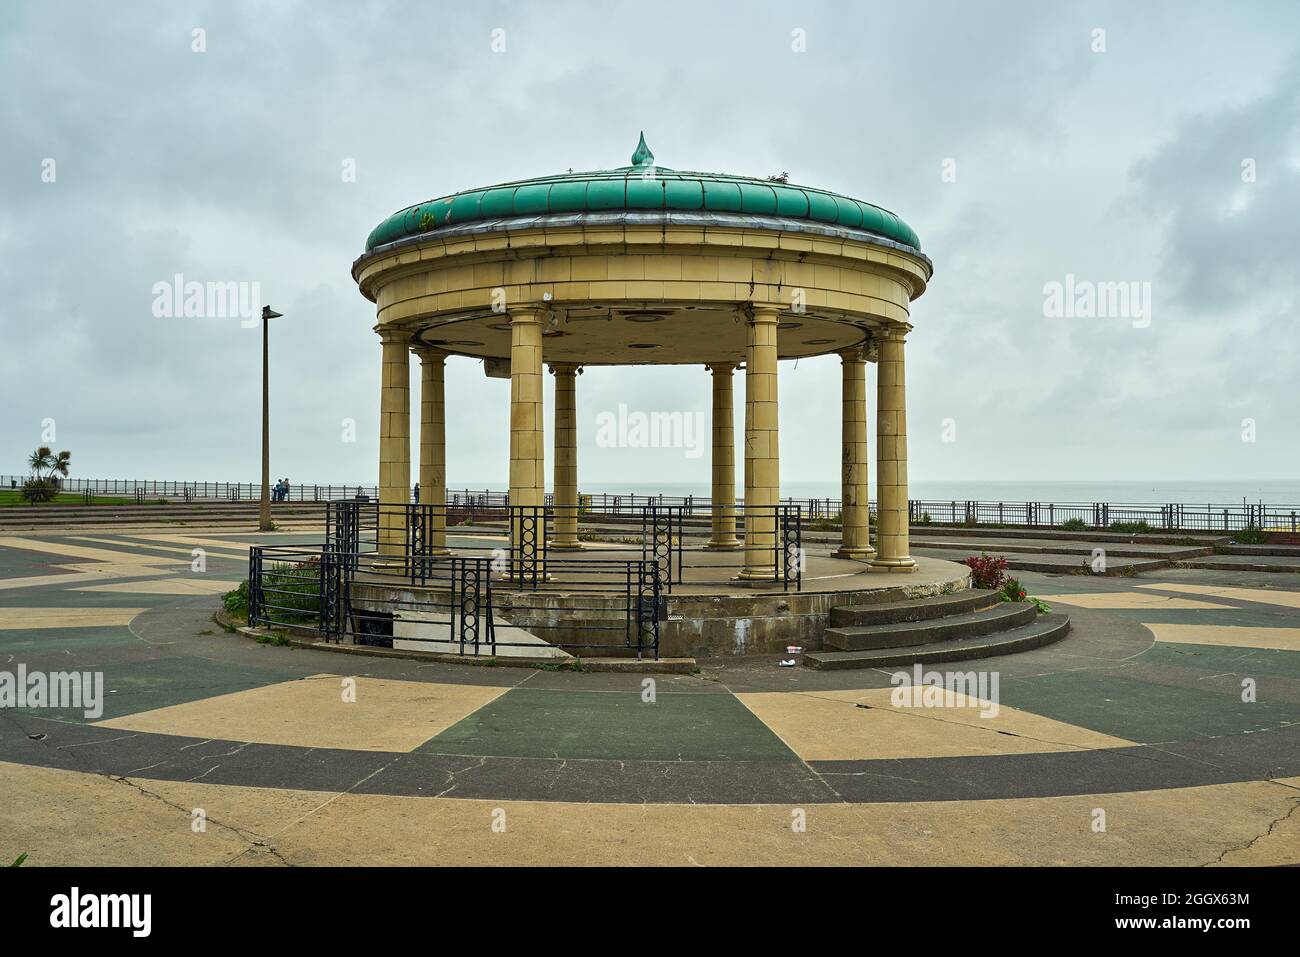 Circular structure with a domed roof clad in green tiles and eight columns in Ramsgate, England Stock Photo